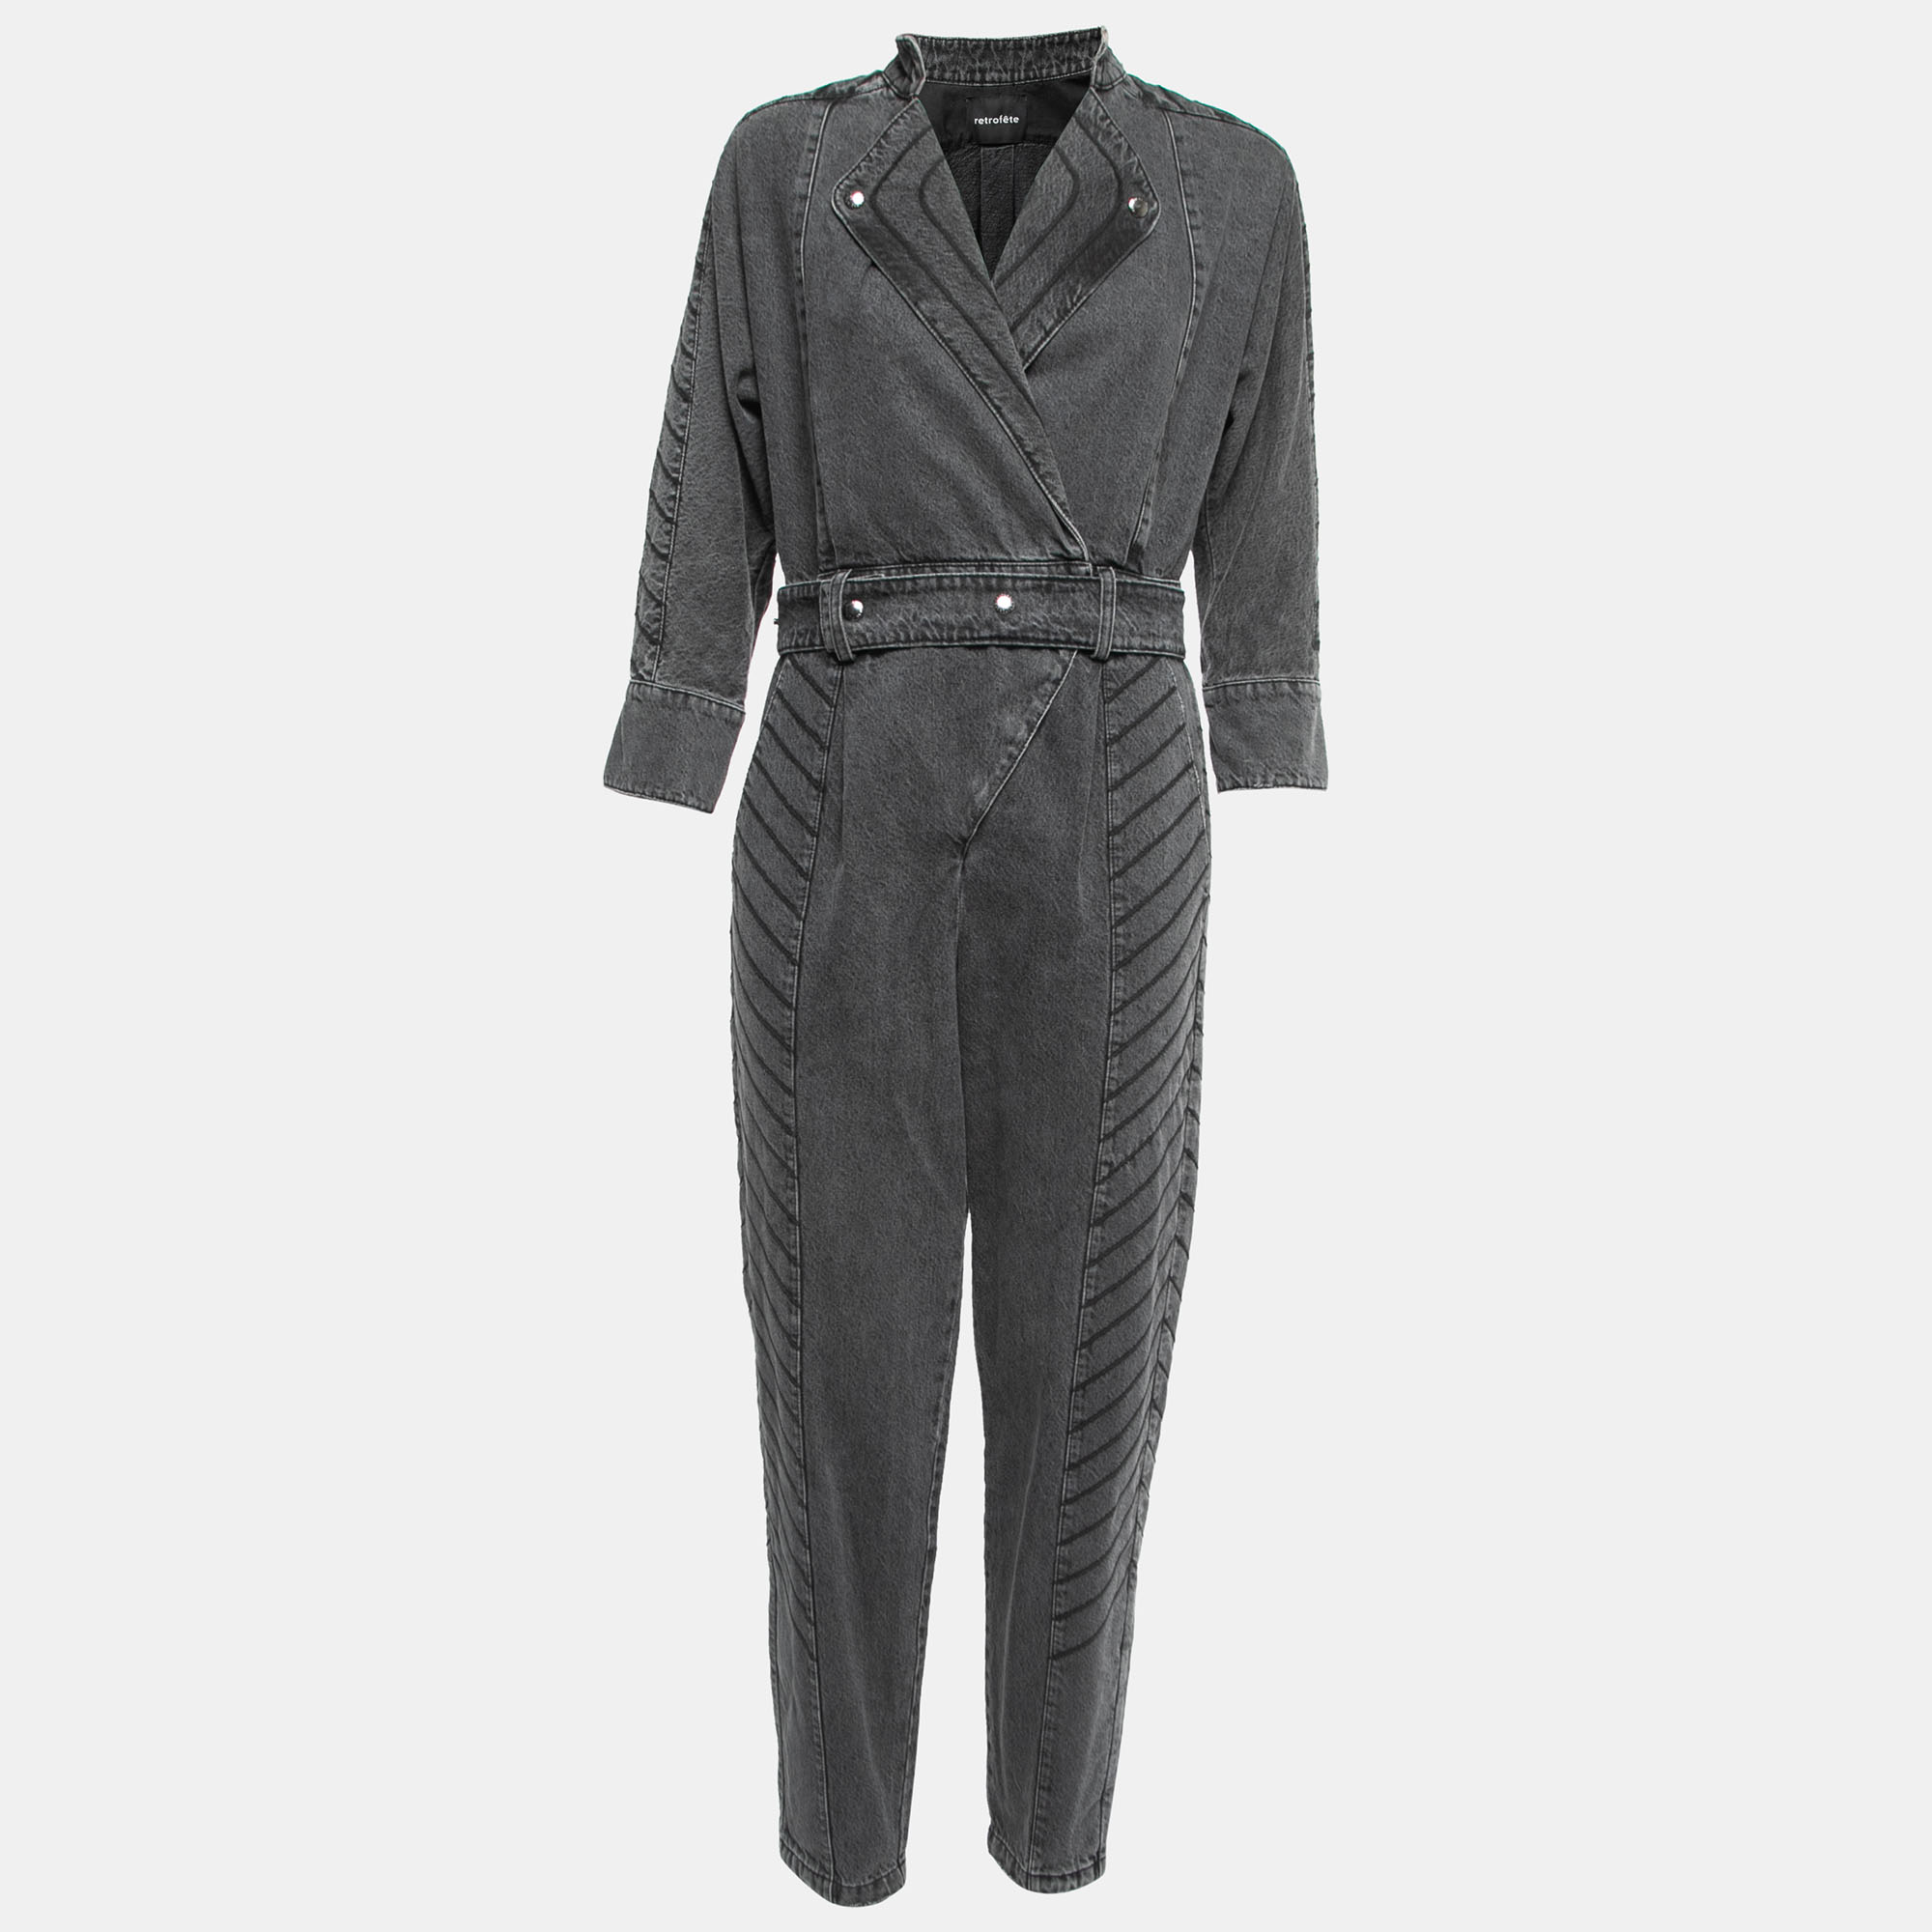 The Retrofête jumpsuit exudes vintage charm with its faded grey distressed denim. The one piece features a flattering belted waist combining style and comfort. Its retro flair combined with modern tailoring makes it a versatile and trendy fashion statement for any occasion.